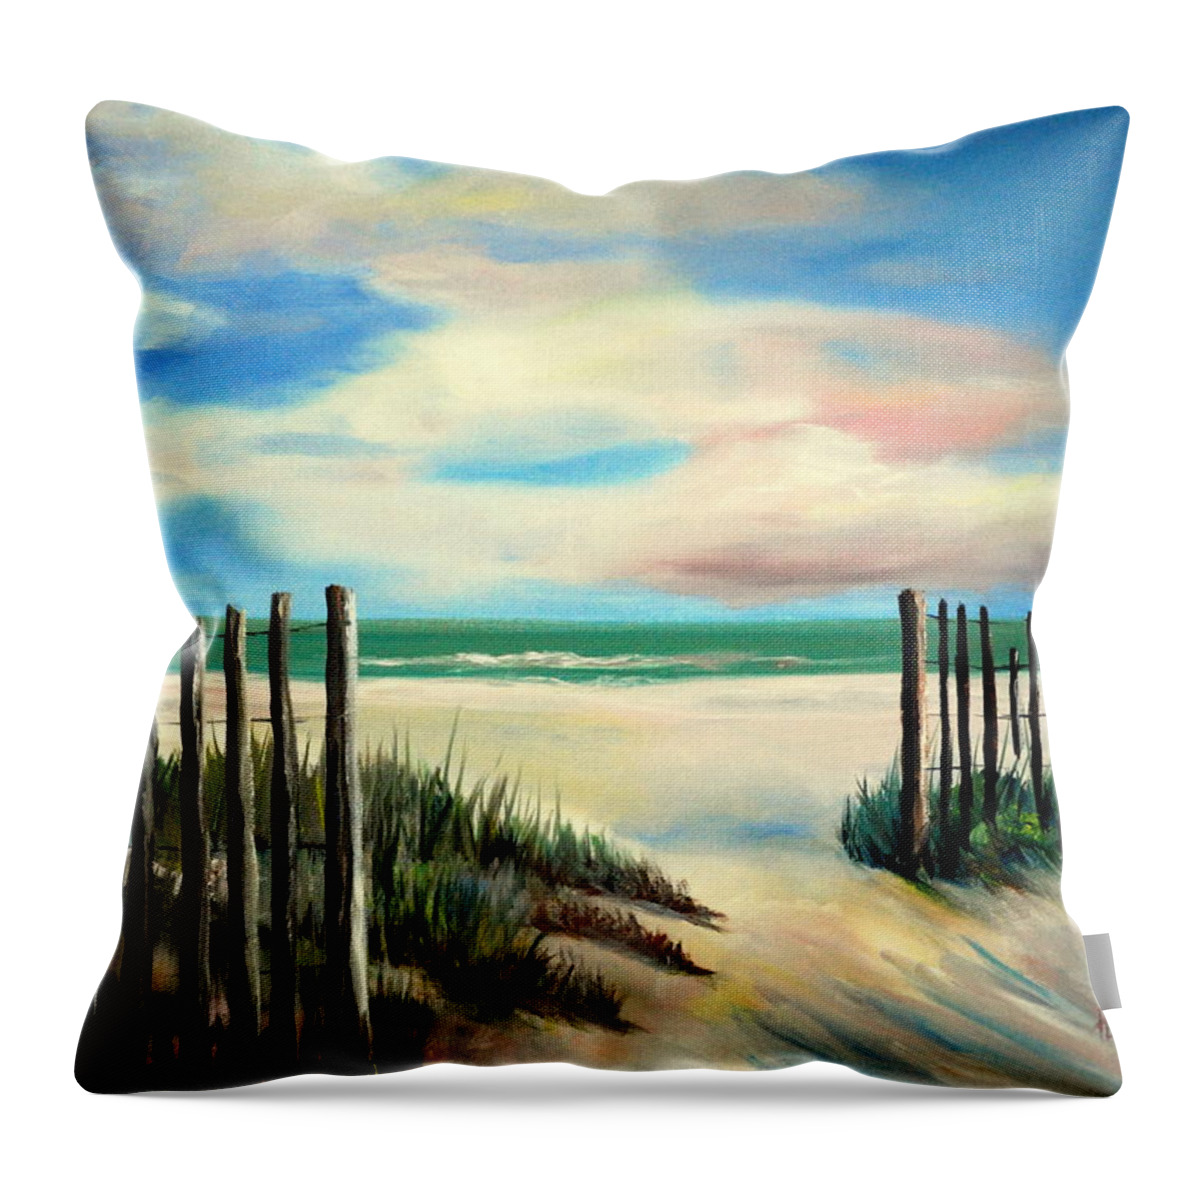 Myrtle Beach Throw Pillow featuring the painting Myrtle Beach Sands by Phil Burton